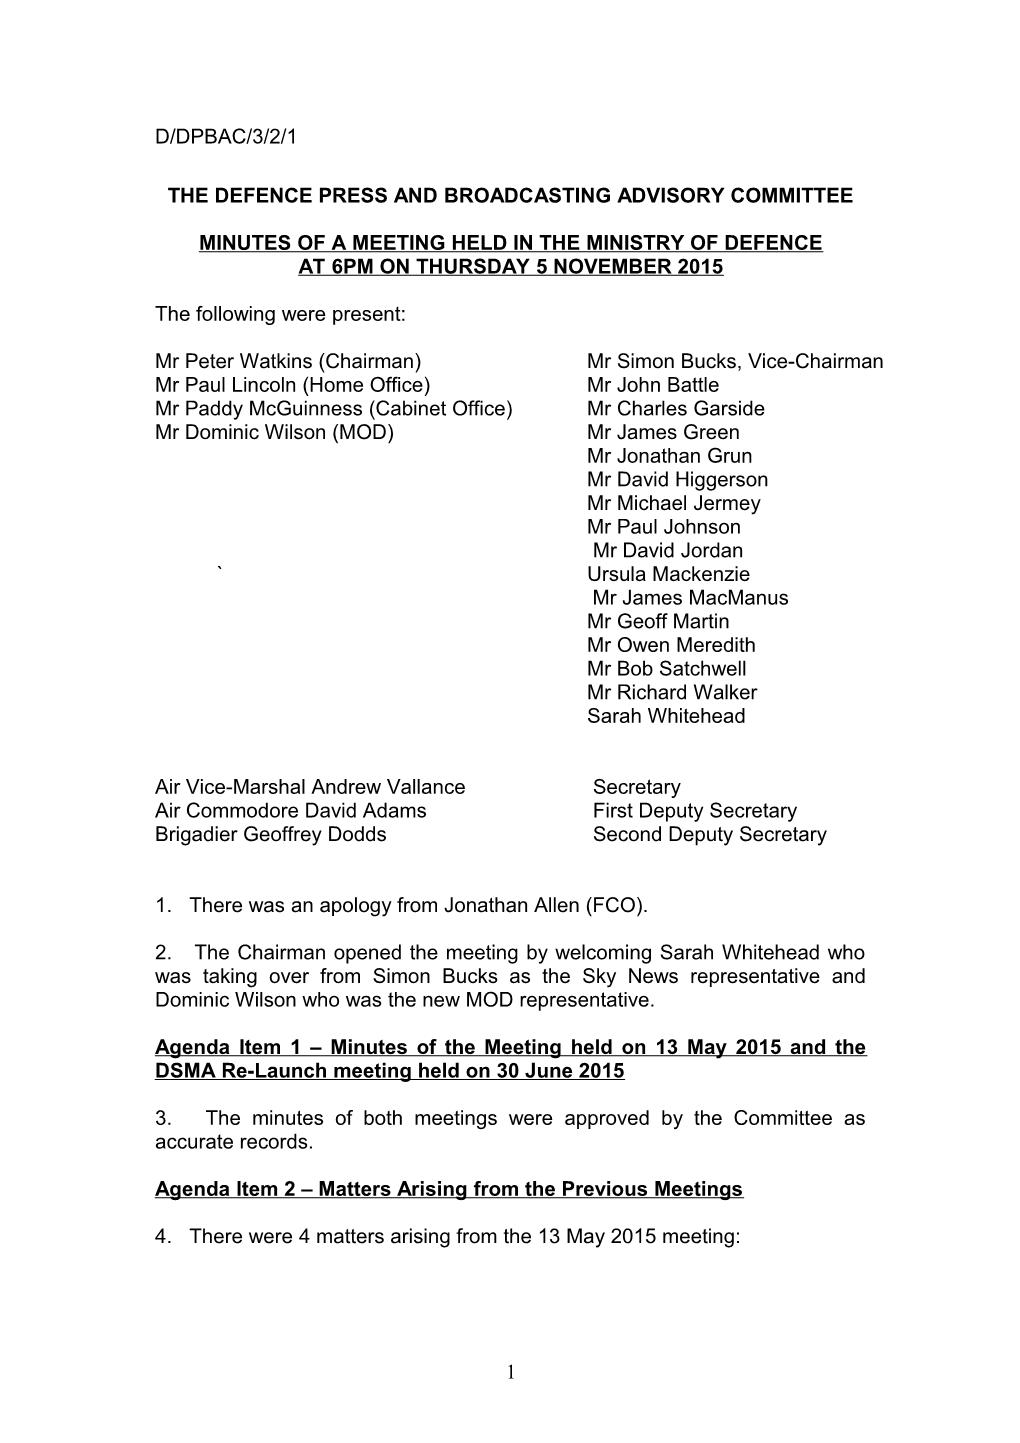 The Defence Press and Broadcasting Advisory Committee